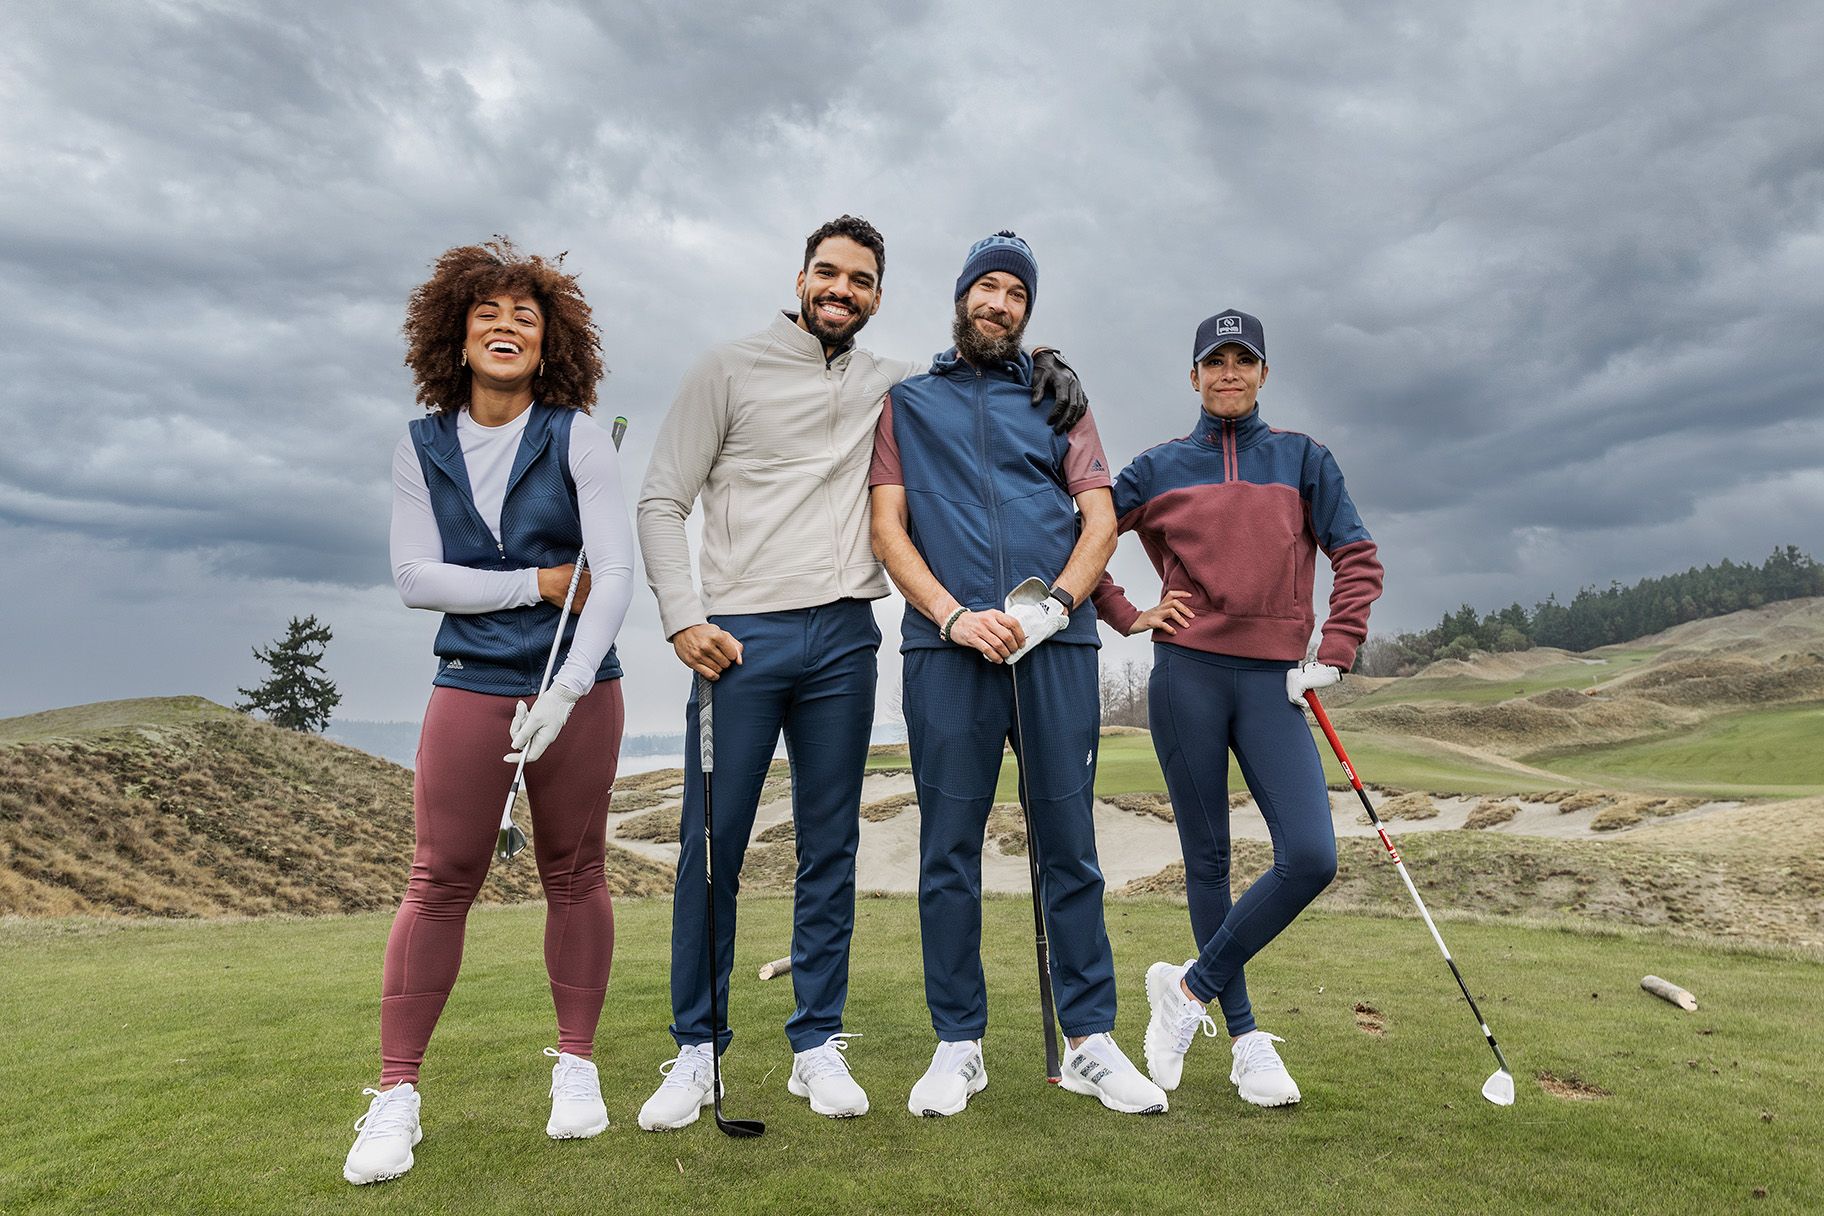 Suave Testificar doblado With Its Latest Collection, Adidas Golf Brings Fleece to the Fairways